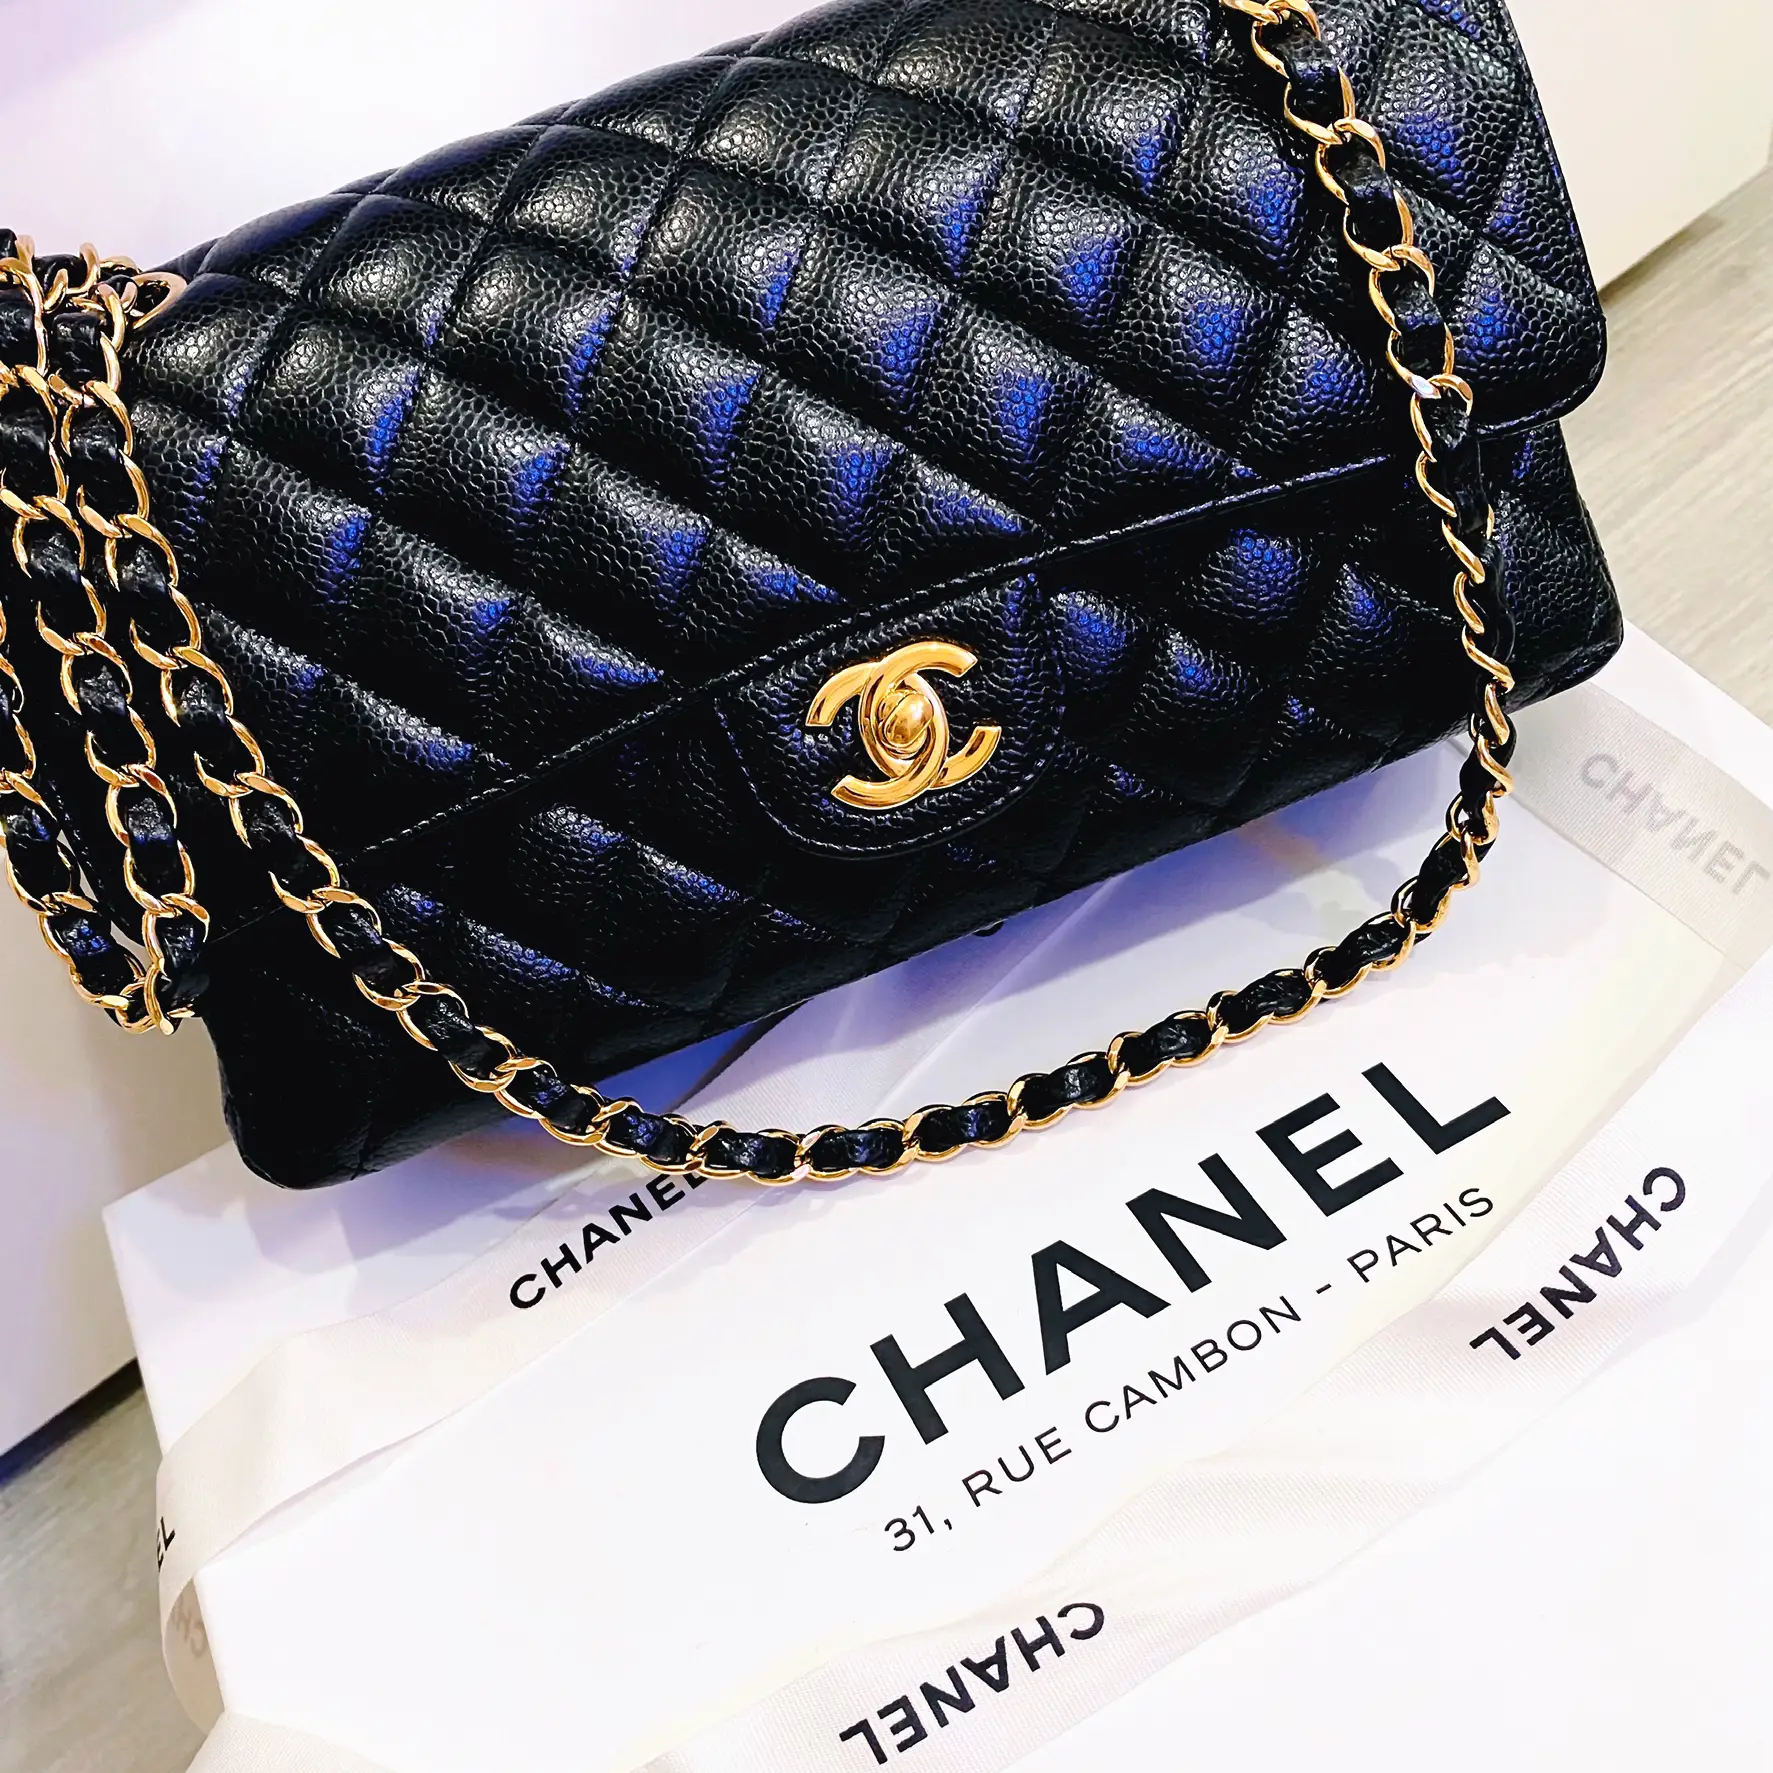 4 CHANEL Small Bags – Worth to Buy, Gallery posted by Amelix